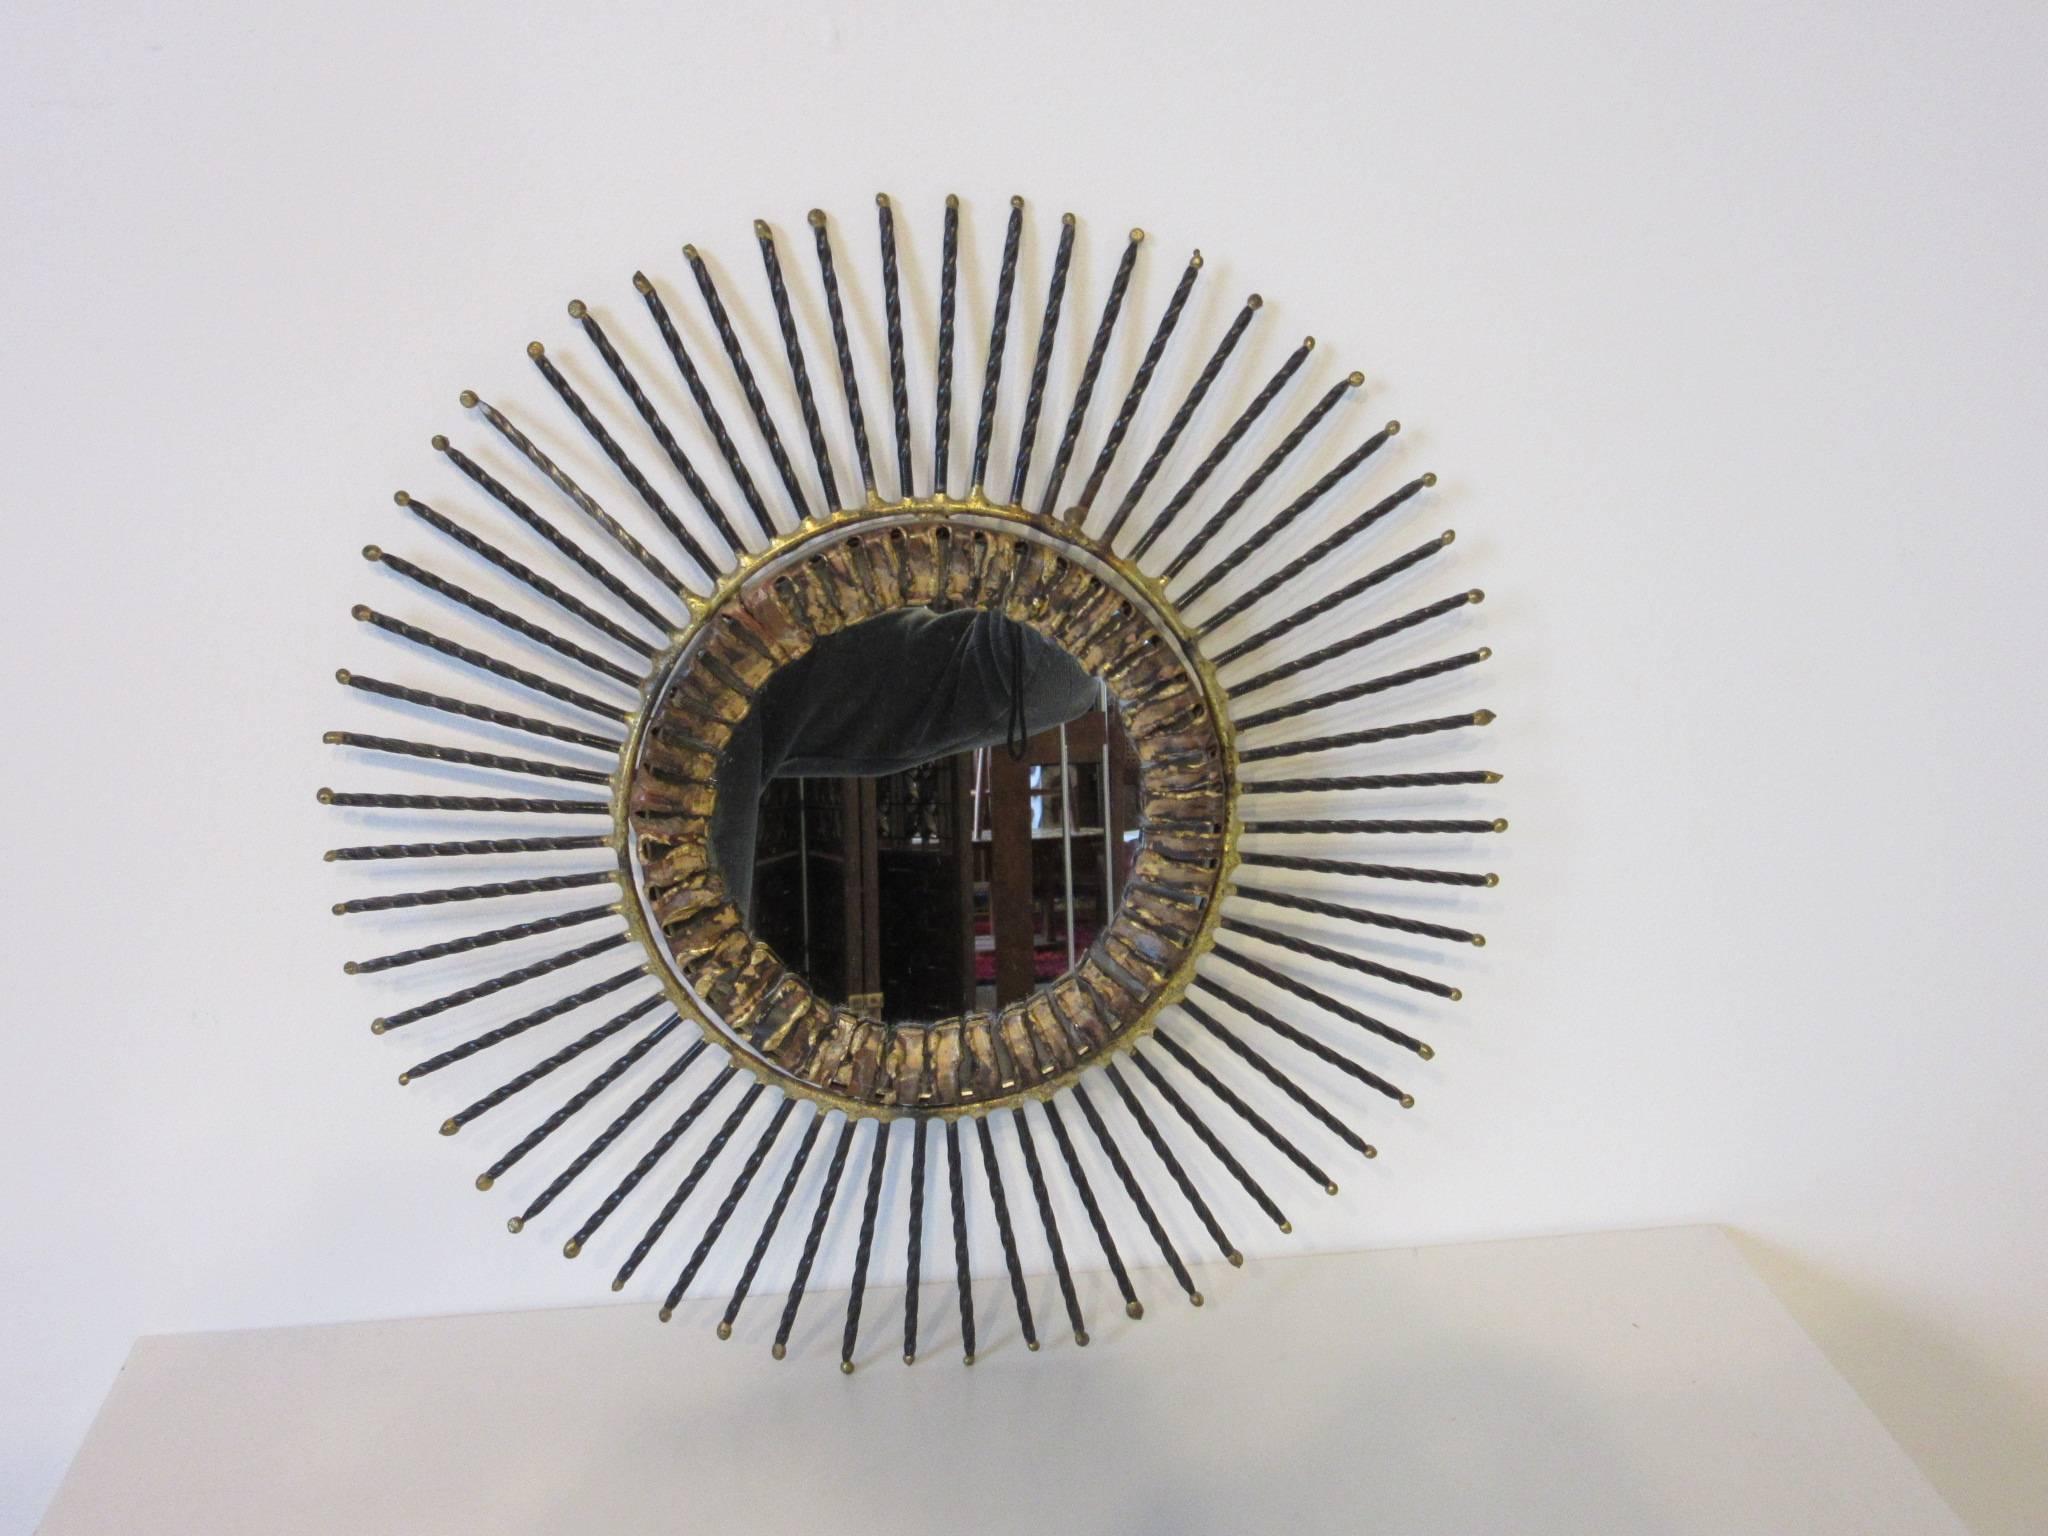 A smaller sized copper, brass and twisted steel mirror which has been welded and torch cut into a great Brutalist styled wall sculpture, ready to hang and artist made by Curtis Jere.